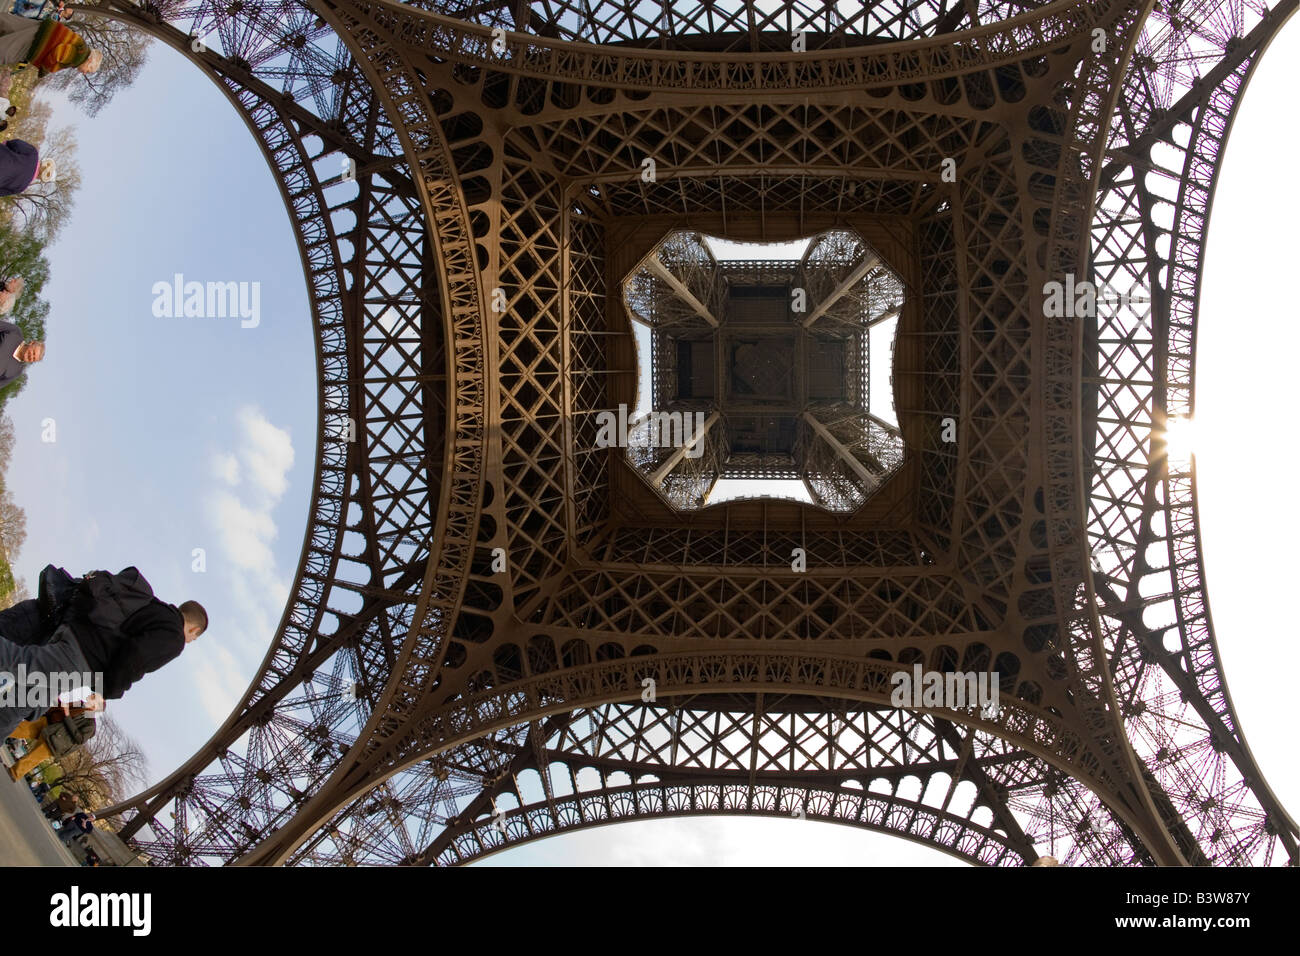 Eiffel Tower wide angle fish-eye under underneath looking up view day daytime daylight Paris France Europe EU Stock Photo